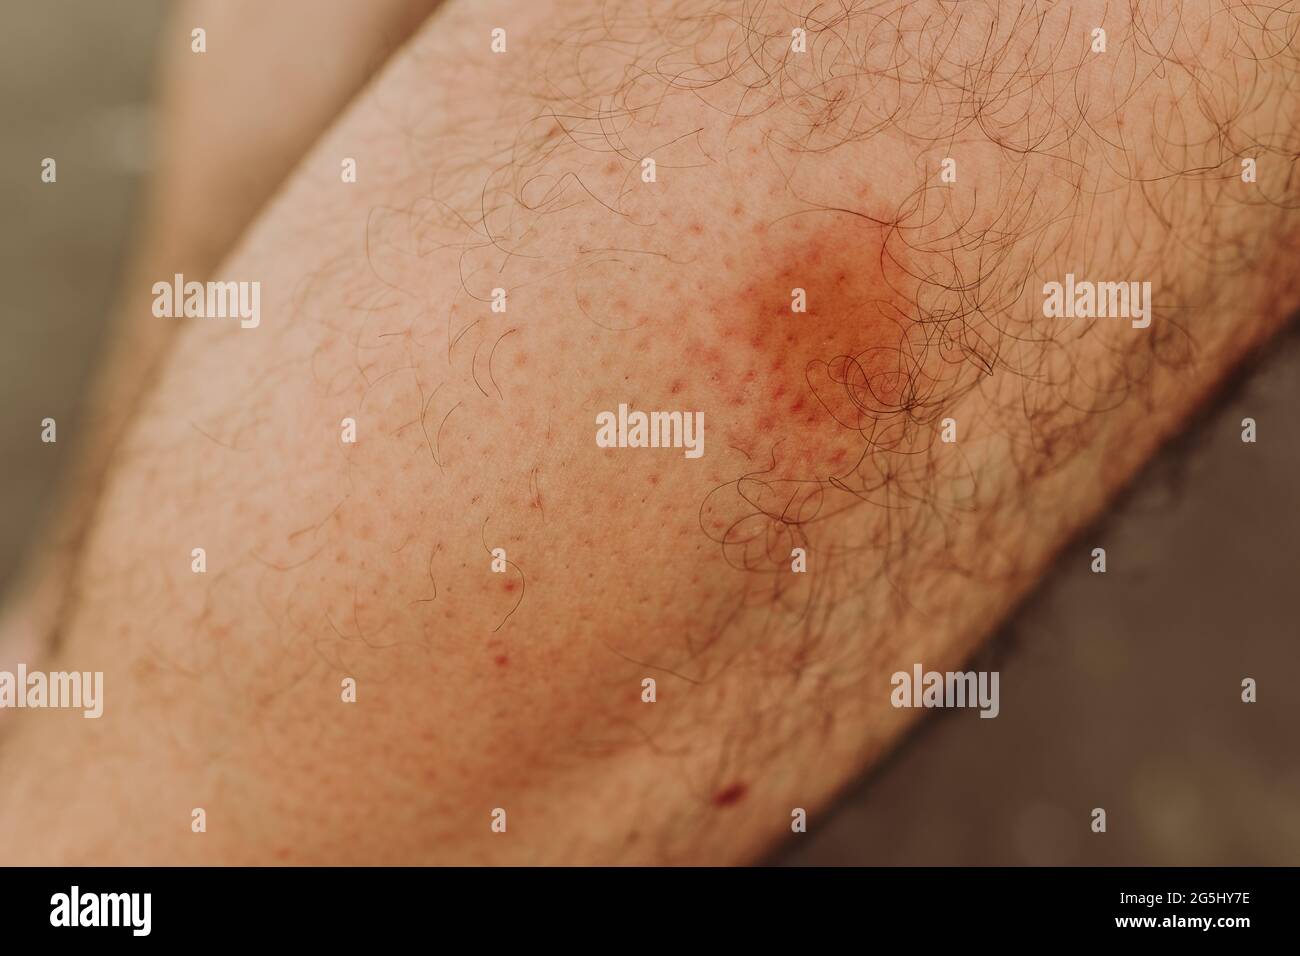 Simuliidae black fly bite mark on the leg below the knee, selective focus Stock Photo